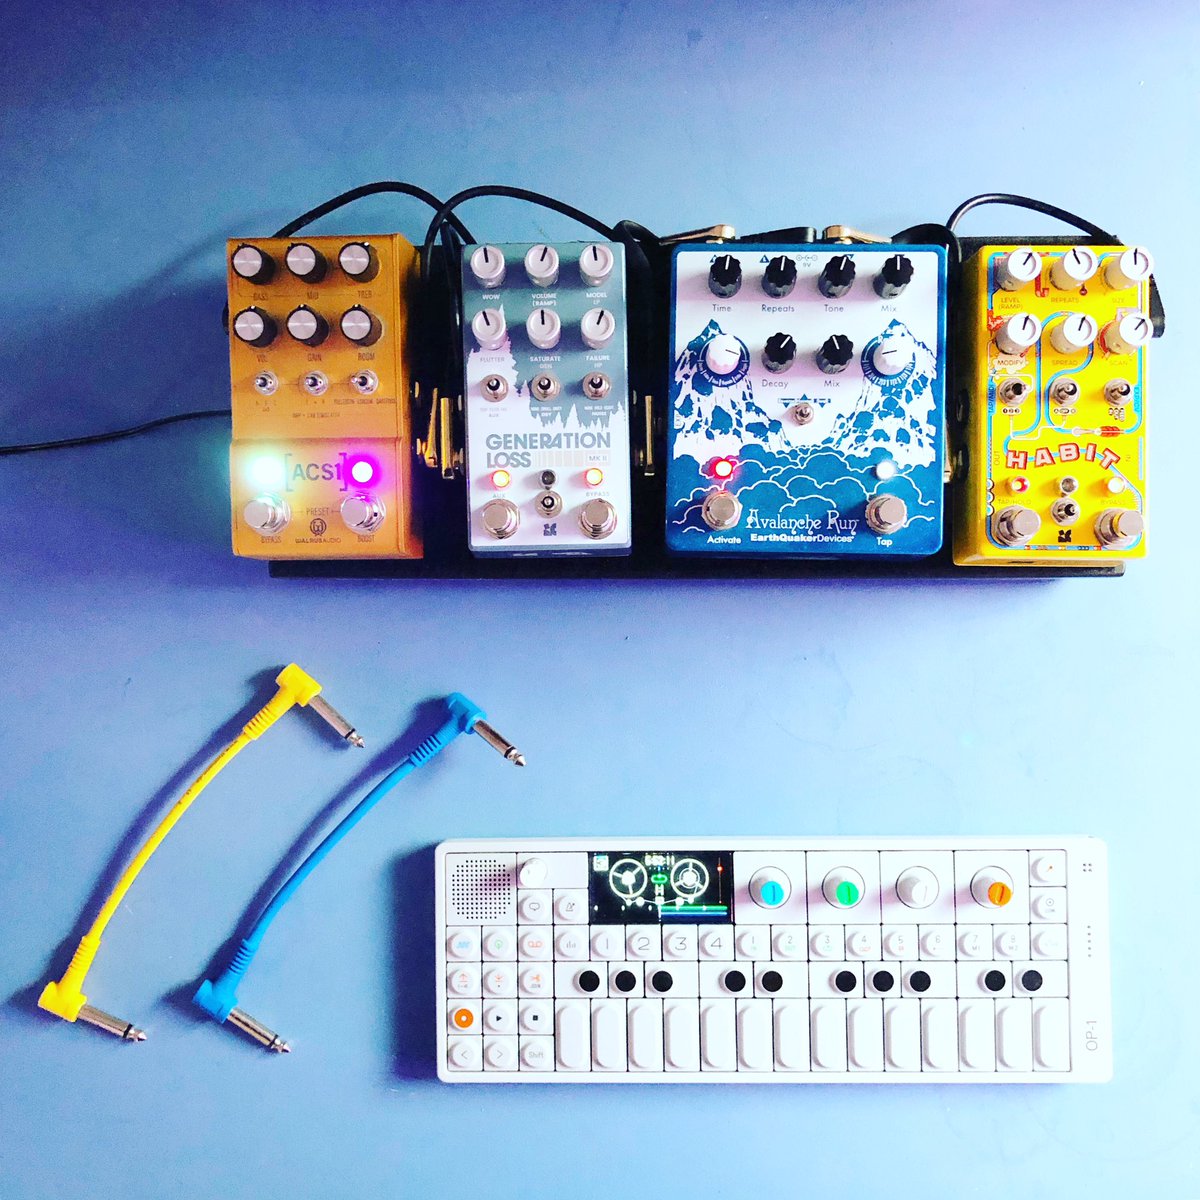 a Yellow and Blue afternoon 🟡🔵

#ambientmusic #guitarpedals #pedalboard #gearnerds #guitareffects #pedals #sounddesign  #teenageengineering #OP1 #soundscape #dawless #ambientcuration #northerntape #welcometospacelounge